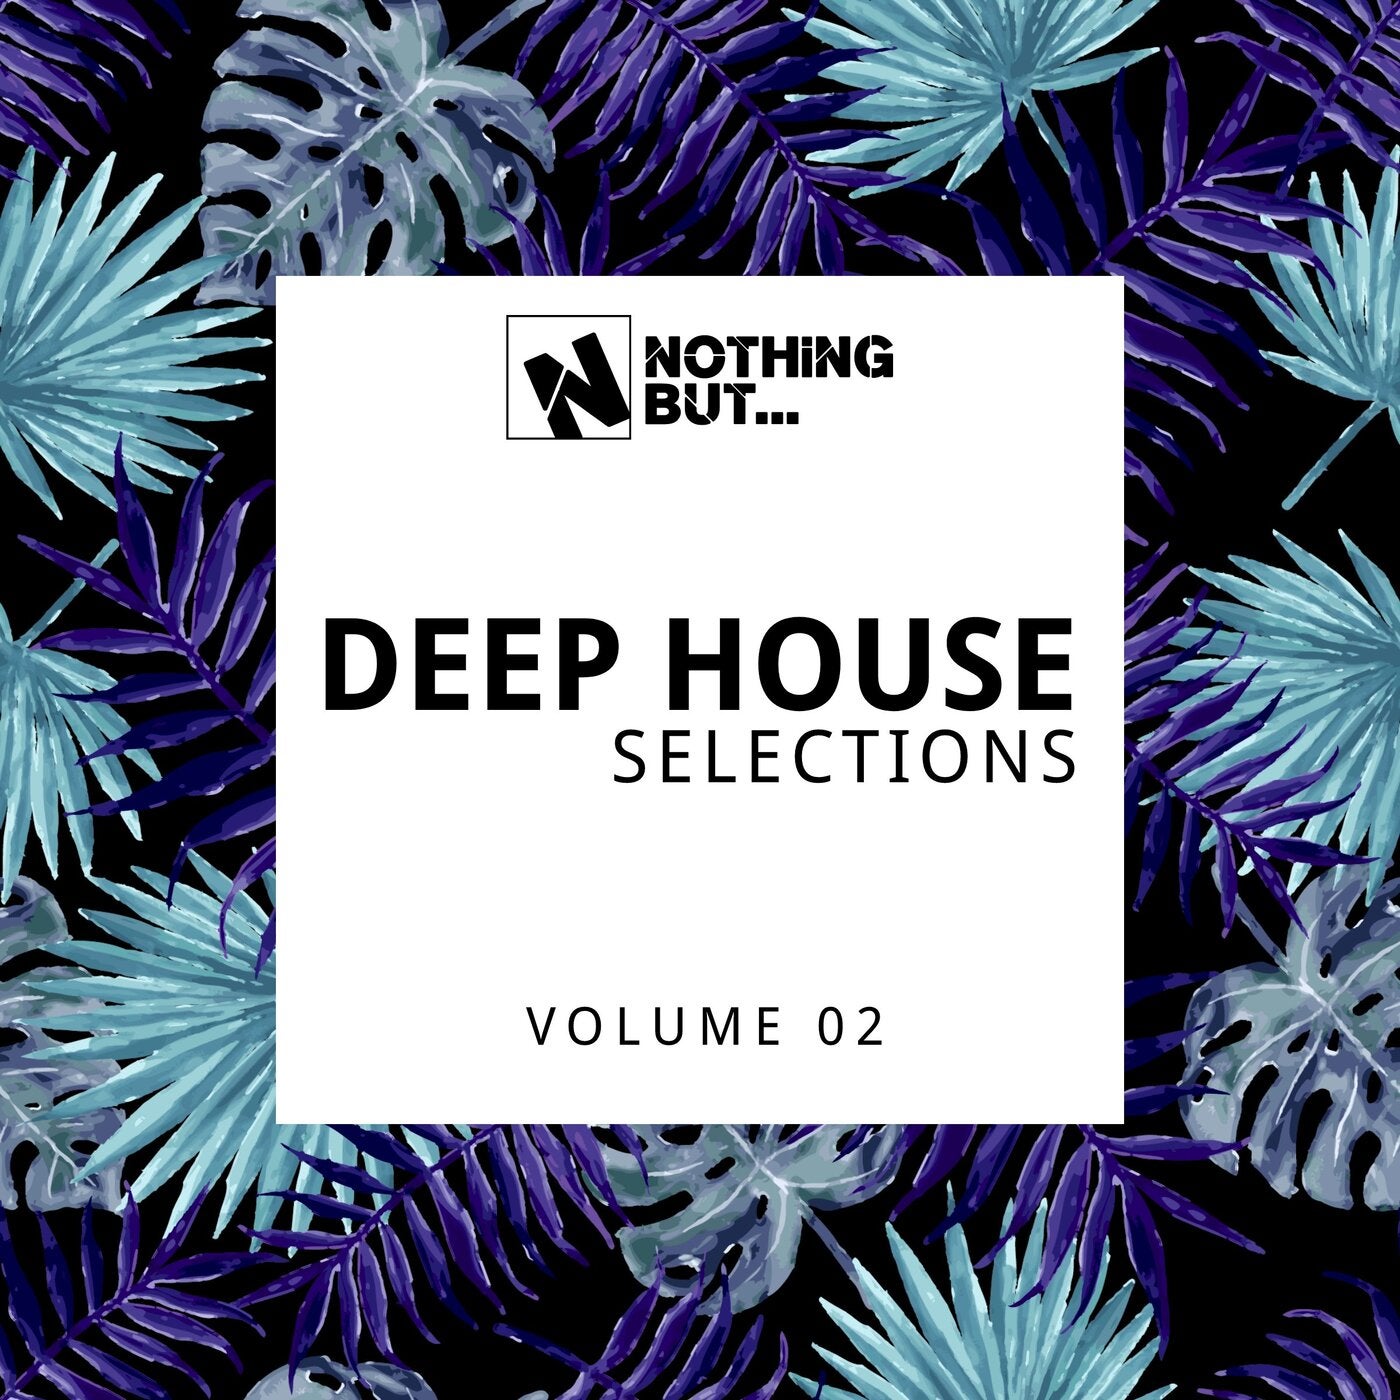 VA – Nothing But… Deep House Selections, Vol. 02 [NBDHS02]